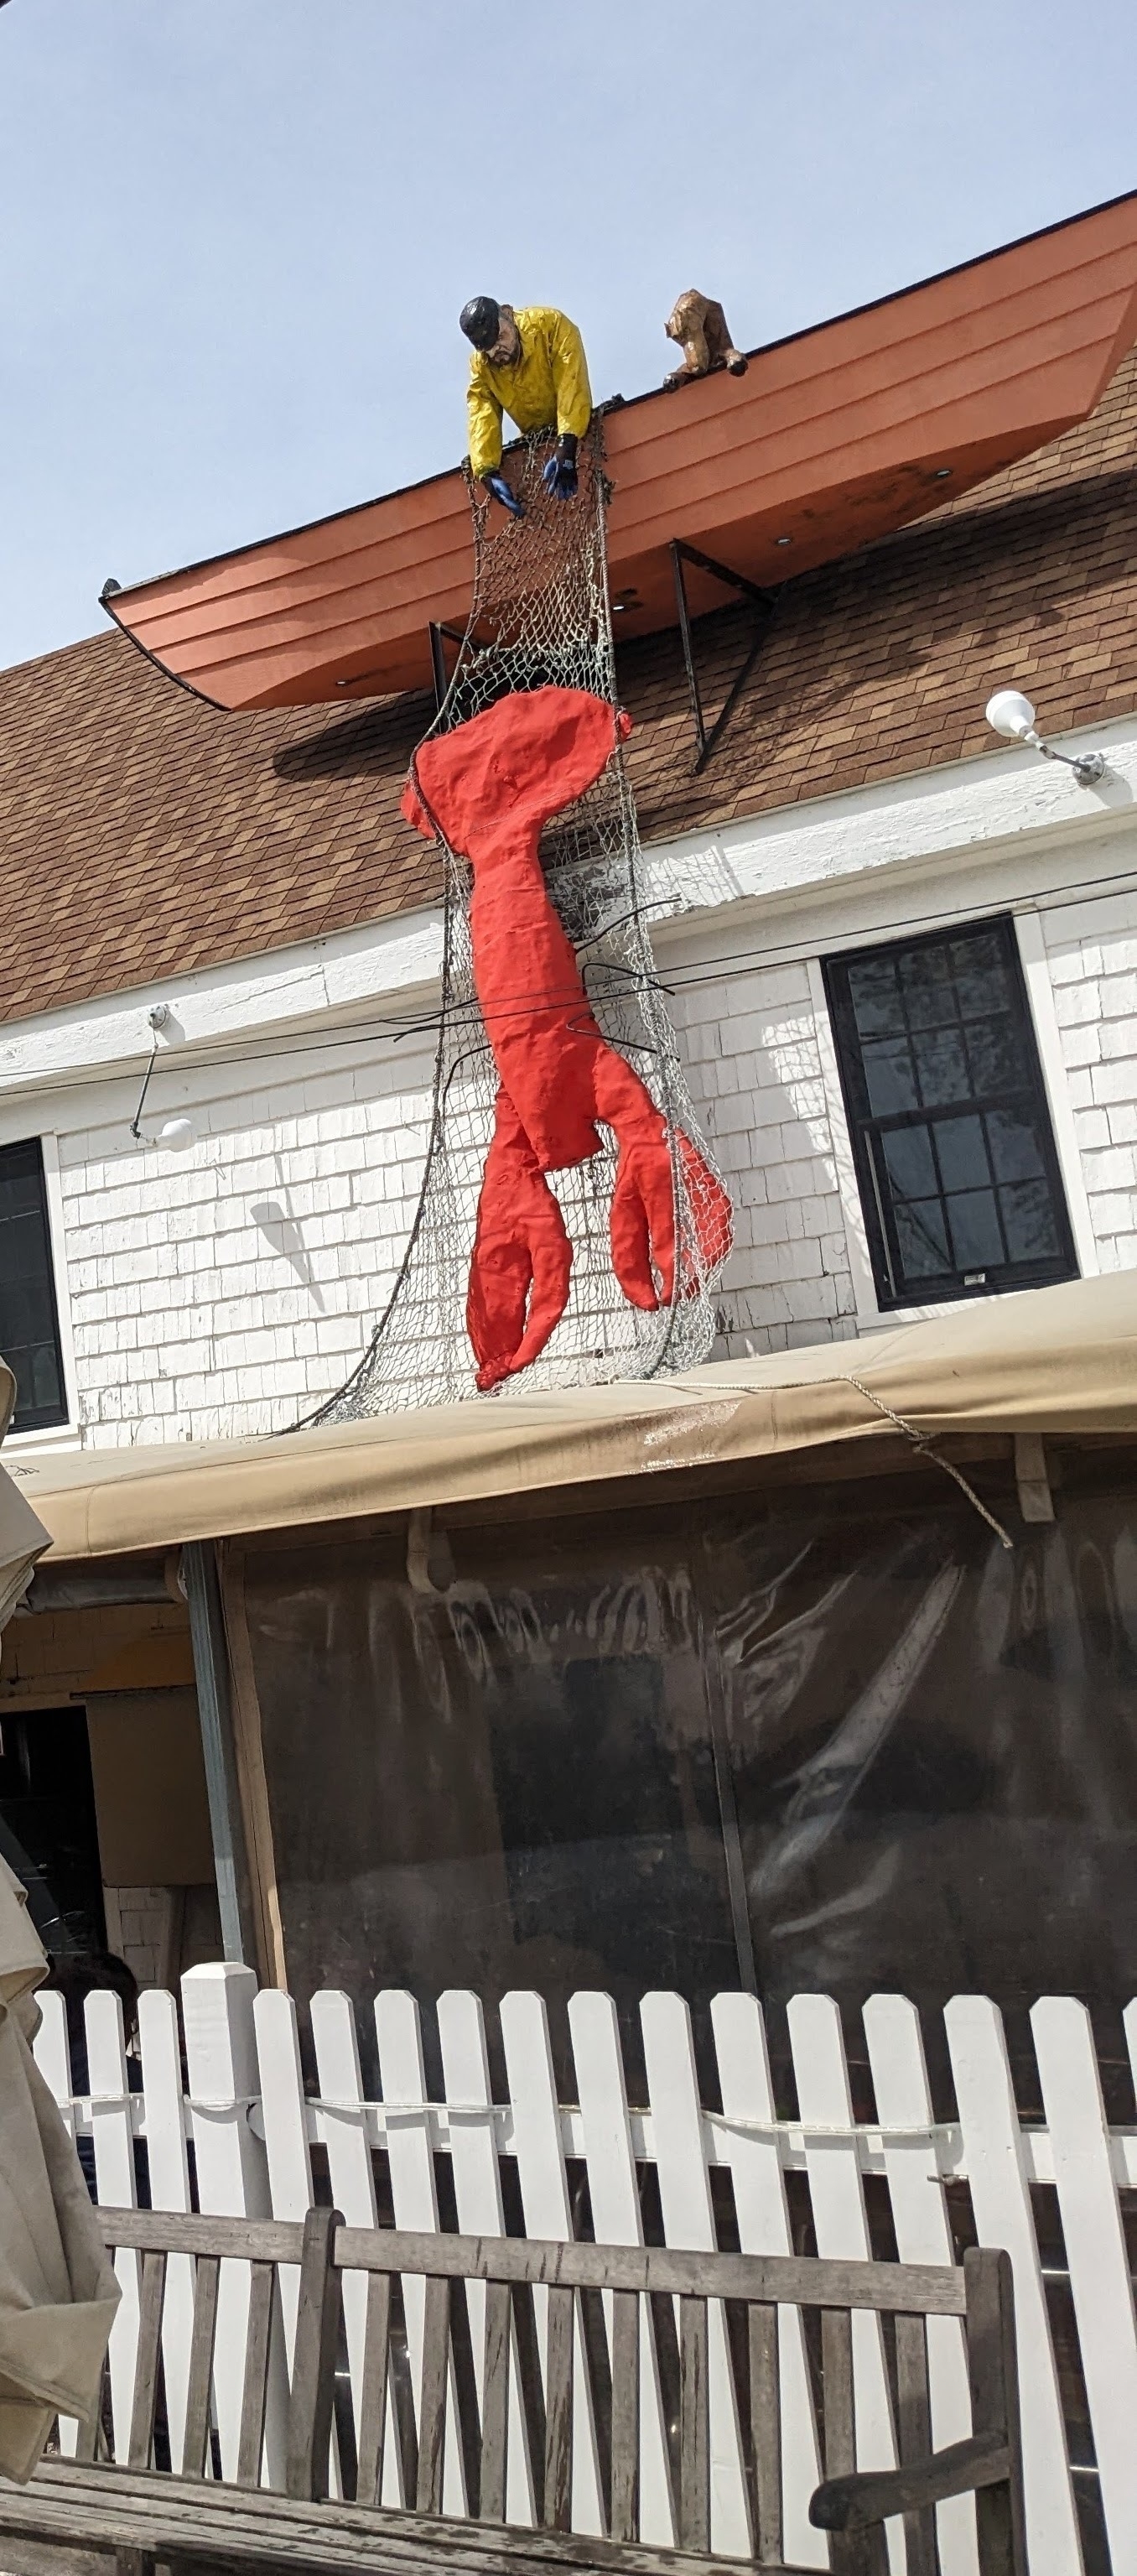 Seafood restaurant on Cape Cod with a giant lobster, boat, and lobsterman sculpture on the rood of the building.